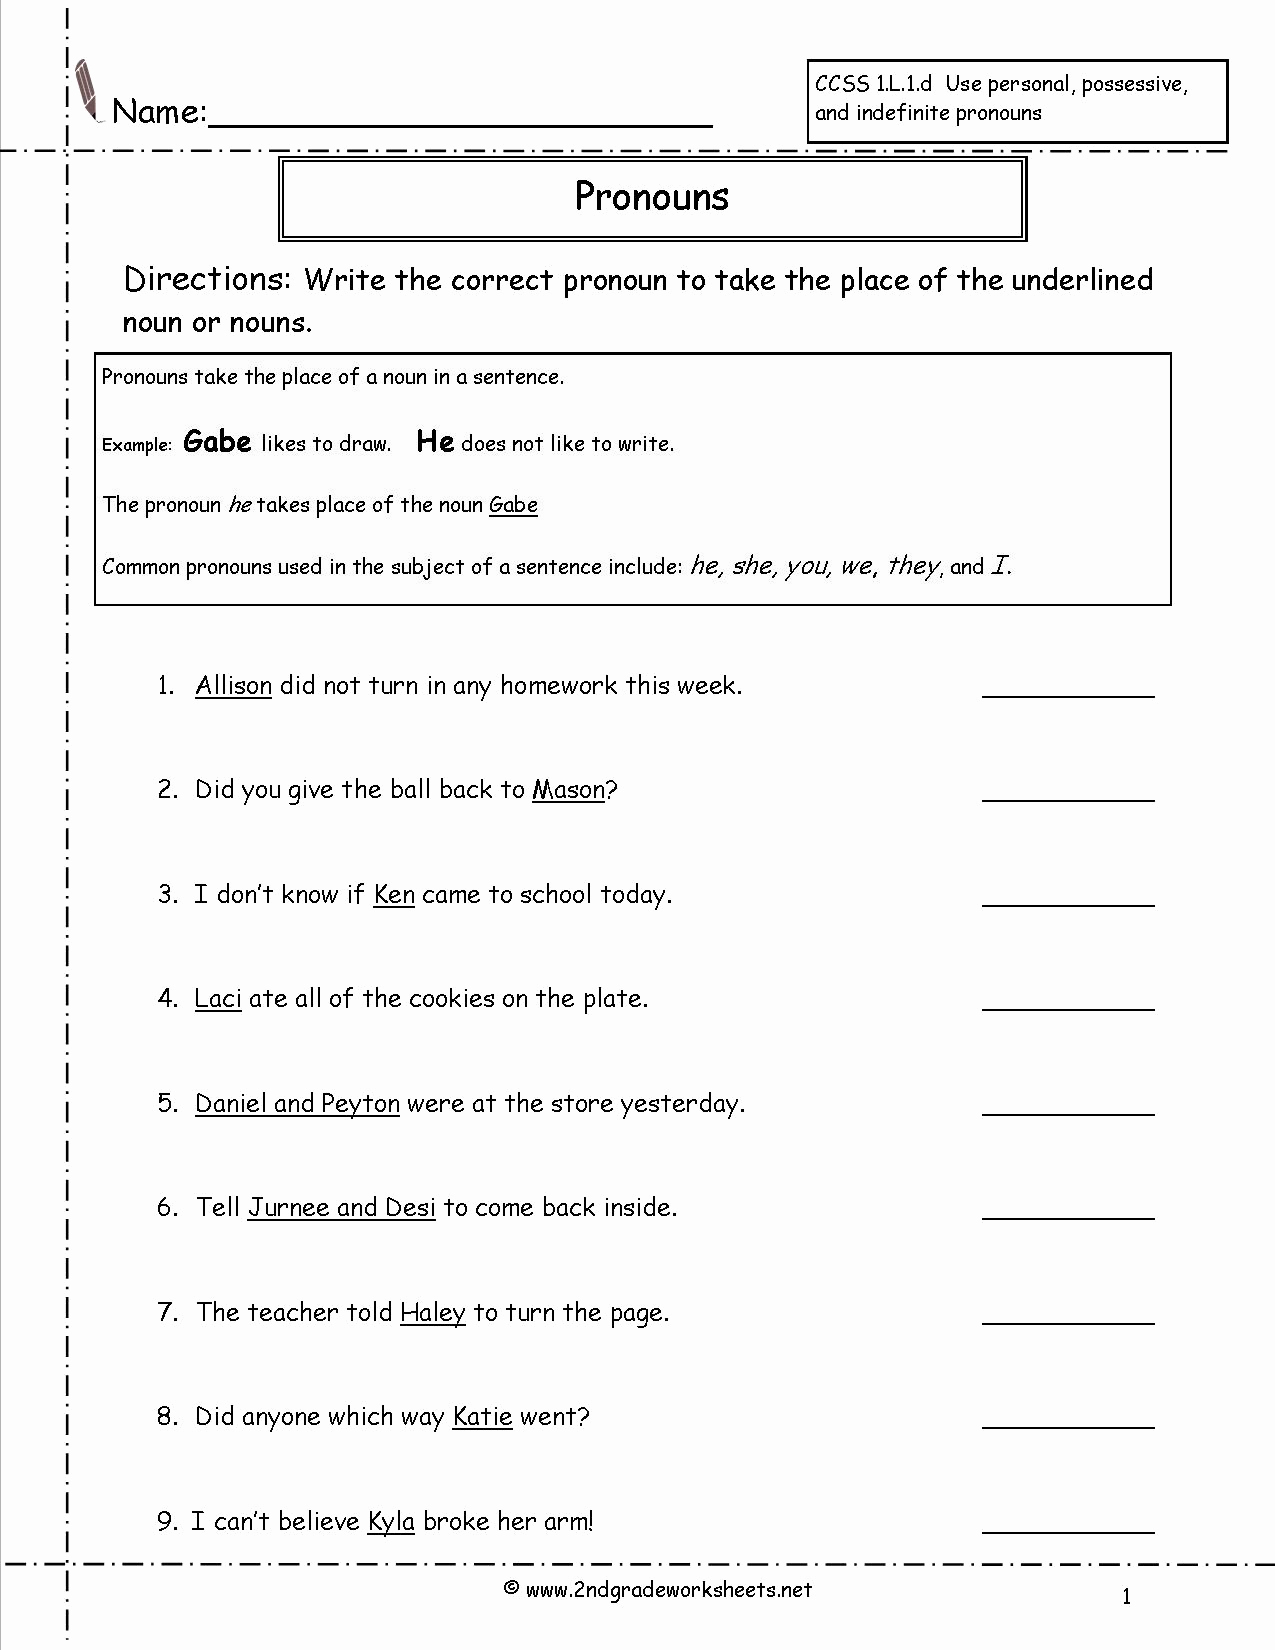 Pronoun Worksheets Second Grade Awesome 15 Best Of Proper Pronouns Worksheets 2nd Grade